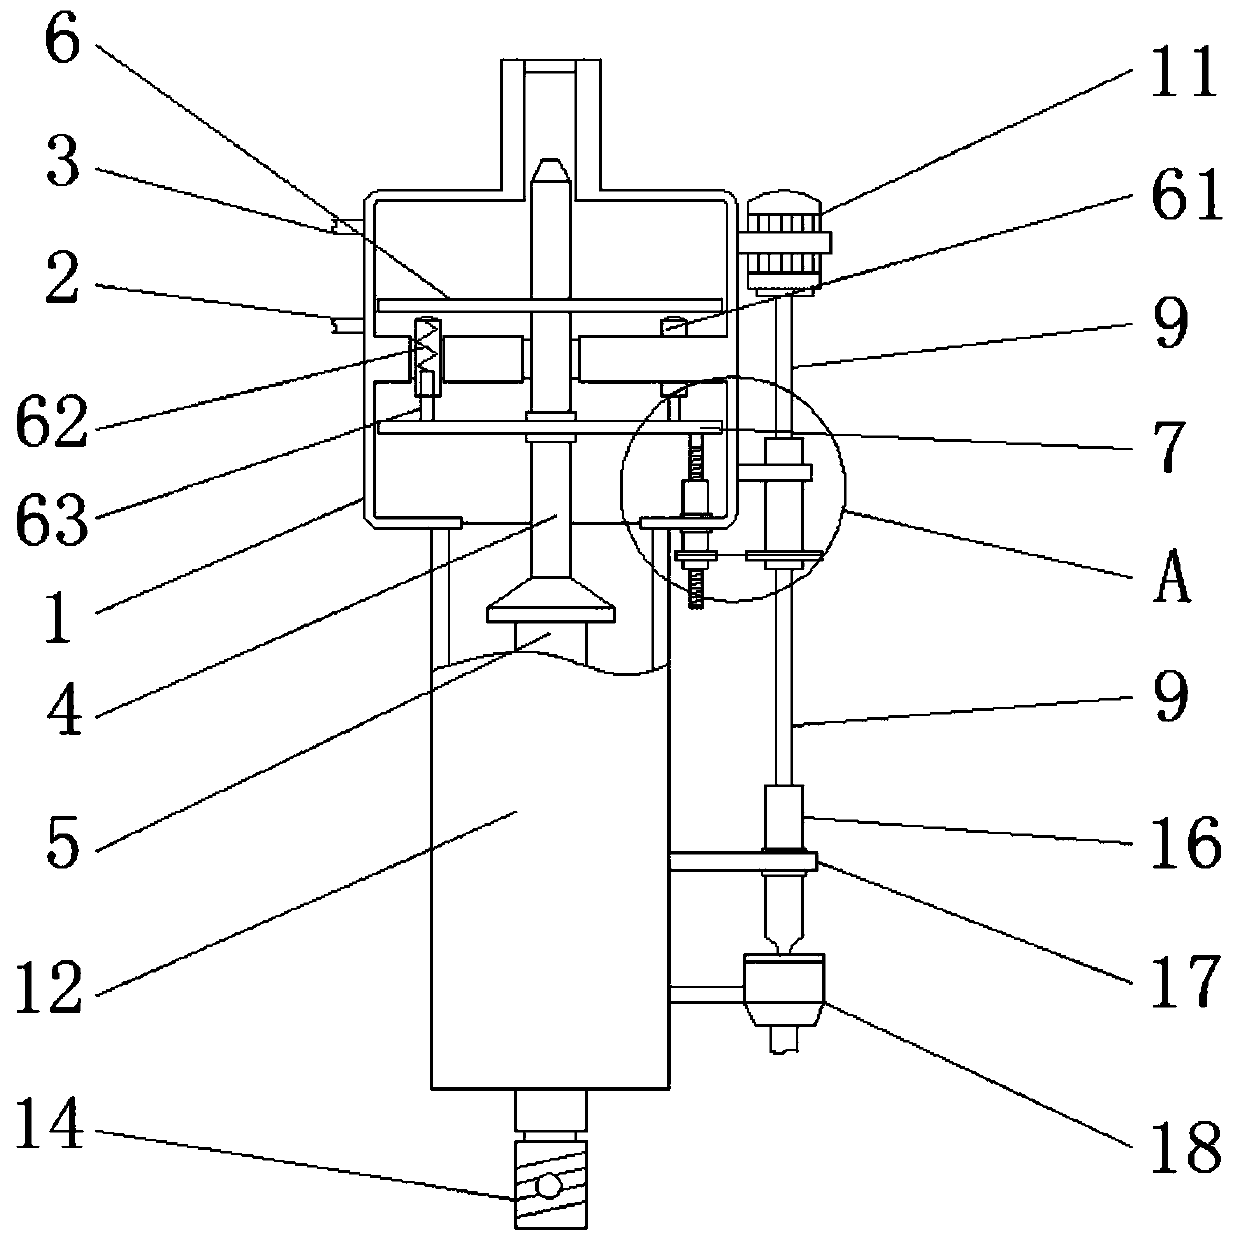 An adjustable hydraulic rock drill based on vibration and shock